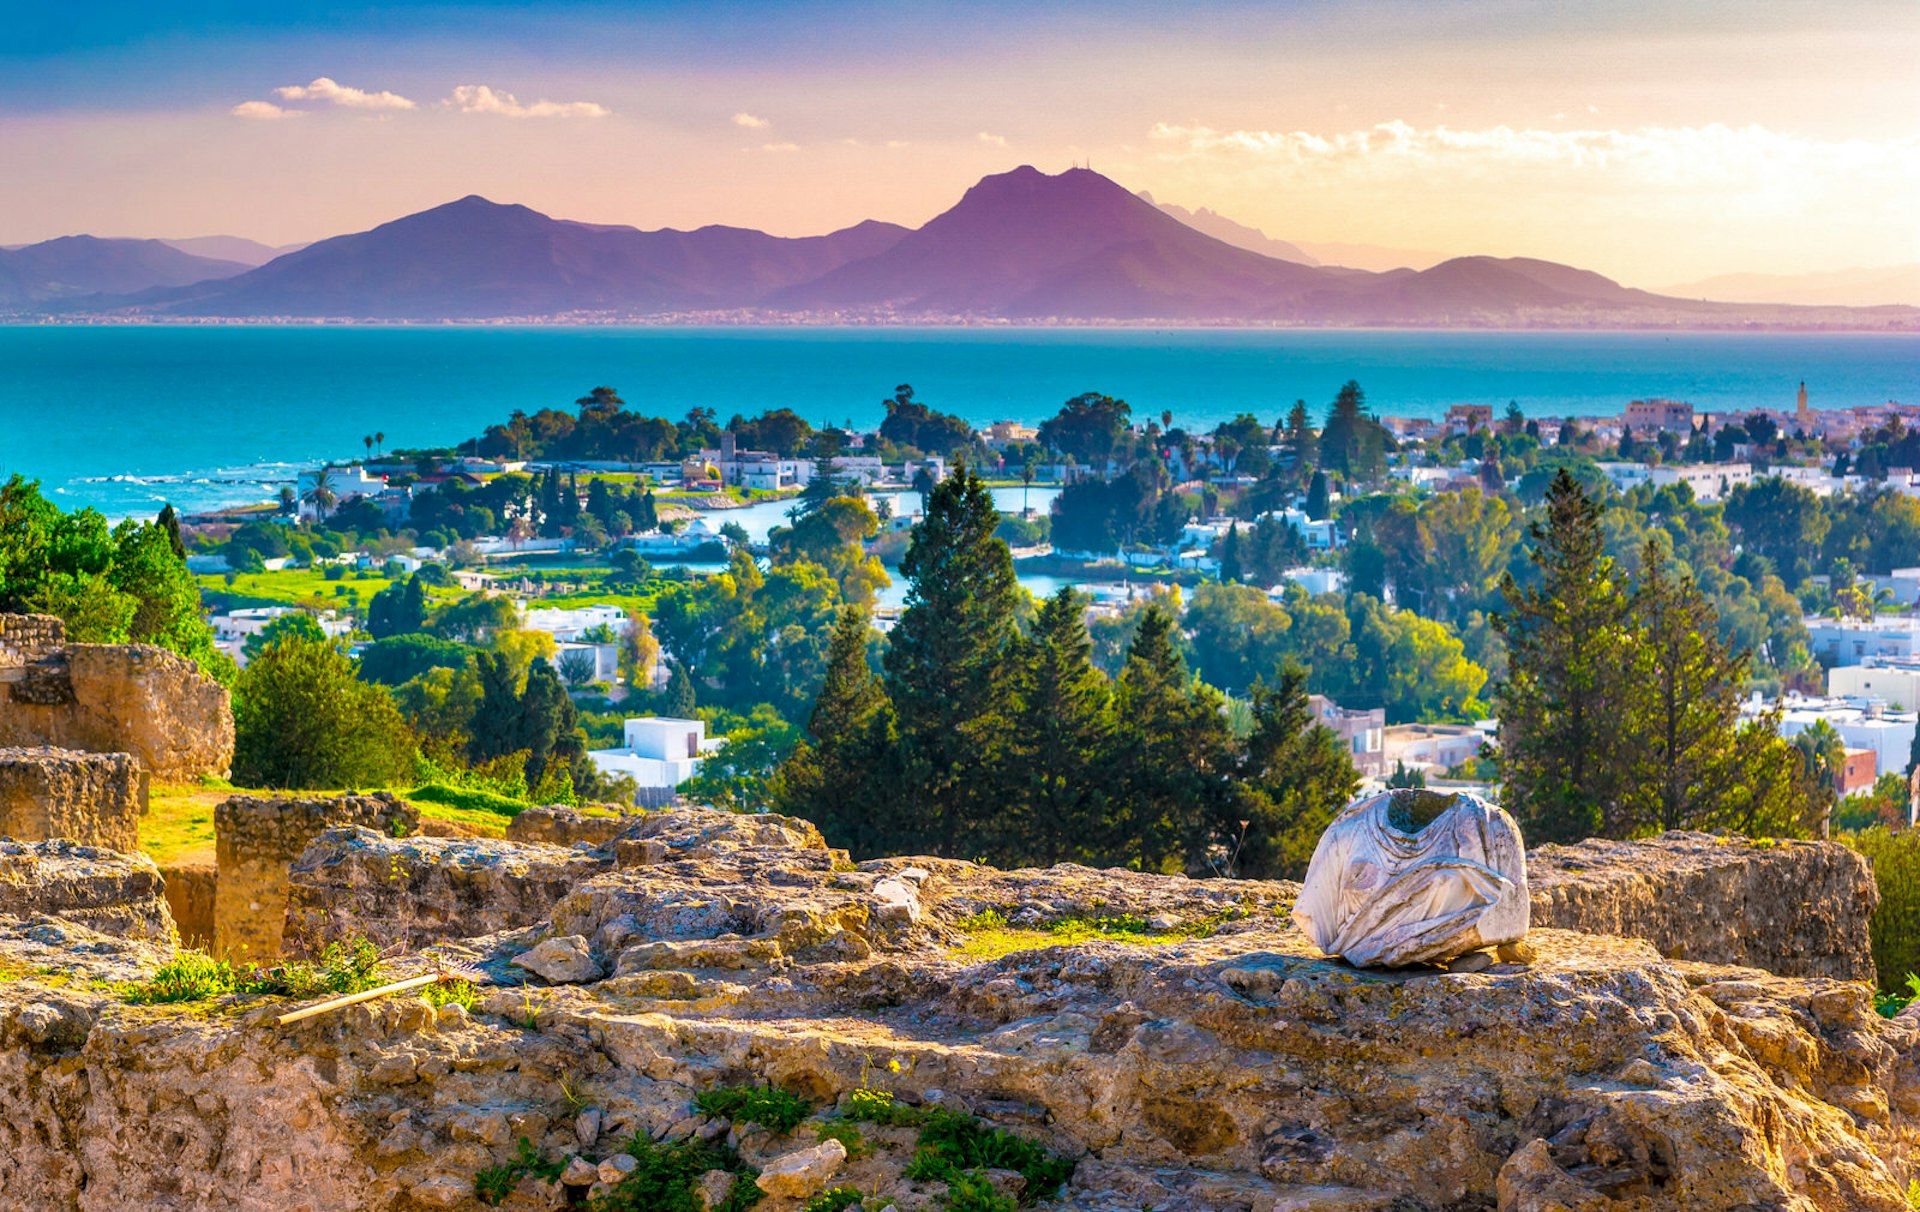 View from hill Byrsa with ancient remains of Carthage and landscape. Tunis, Tunisia. © Romas_Photo / Shutterstock